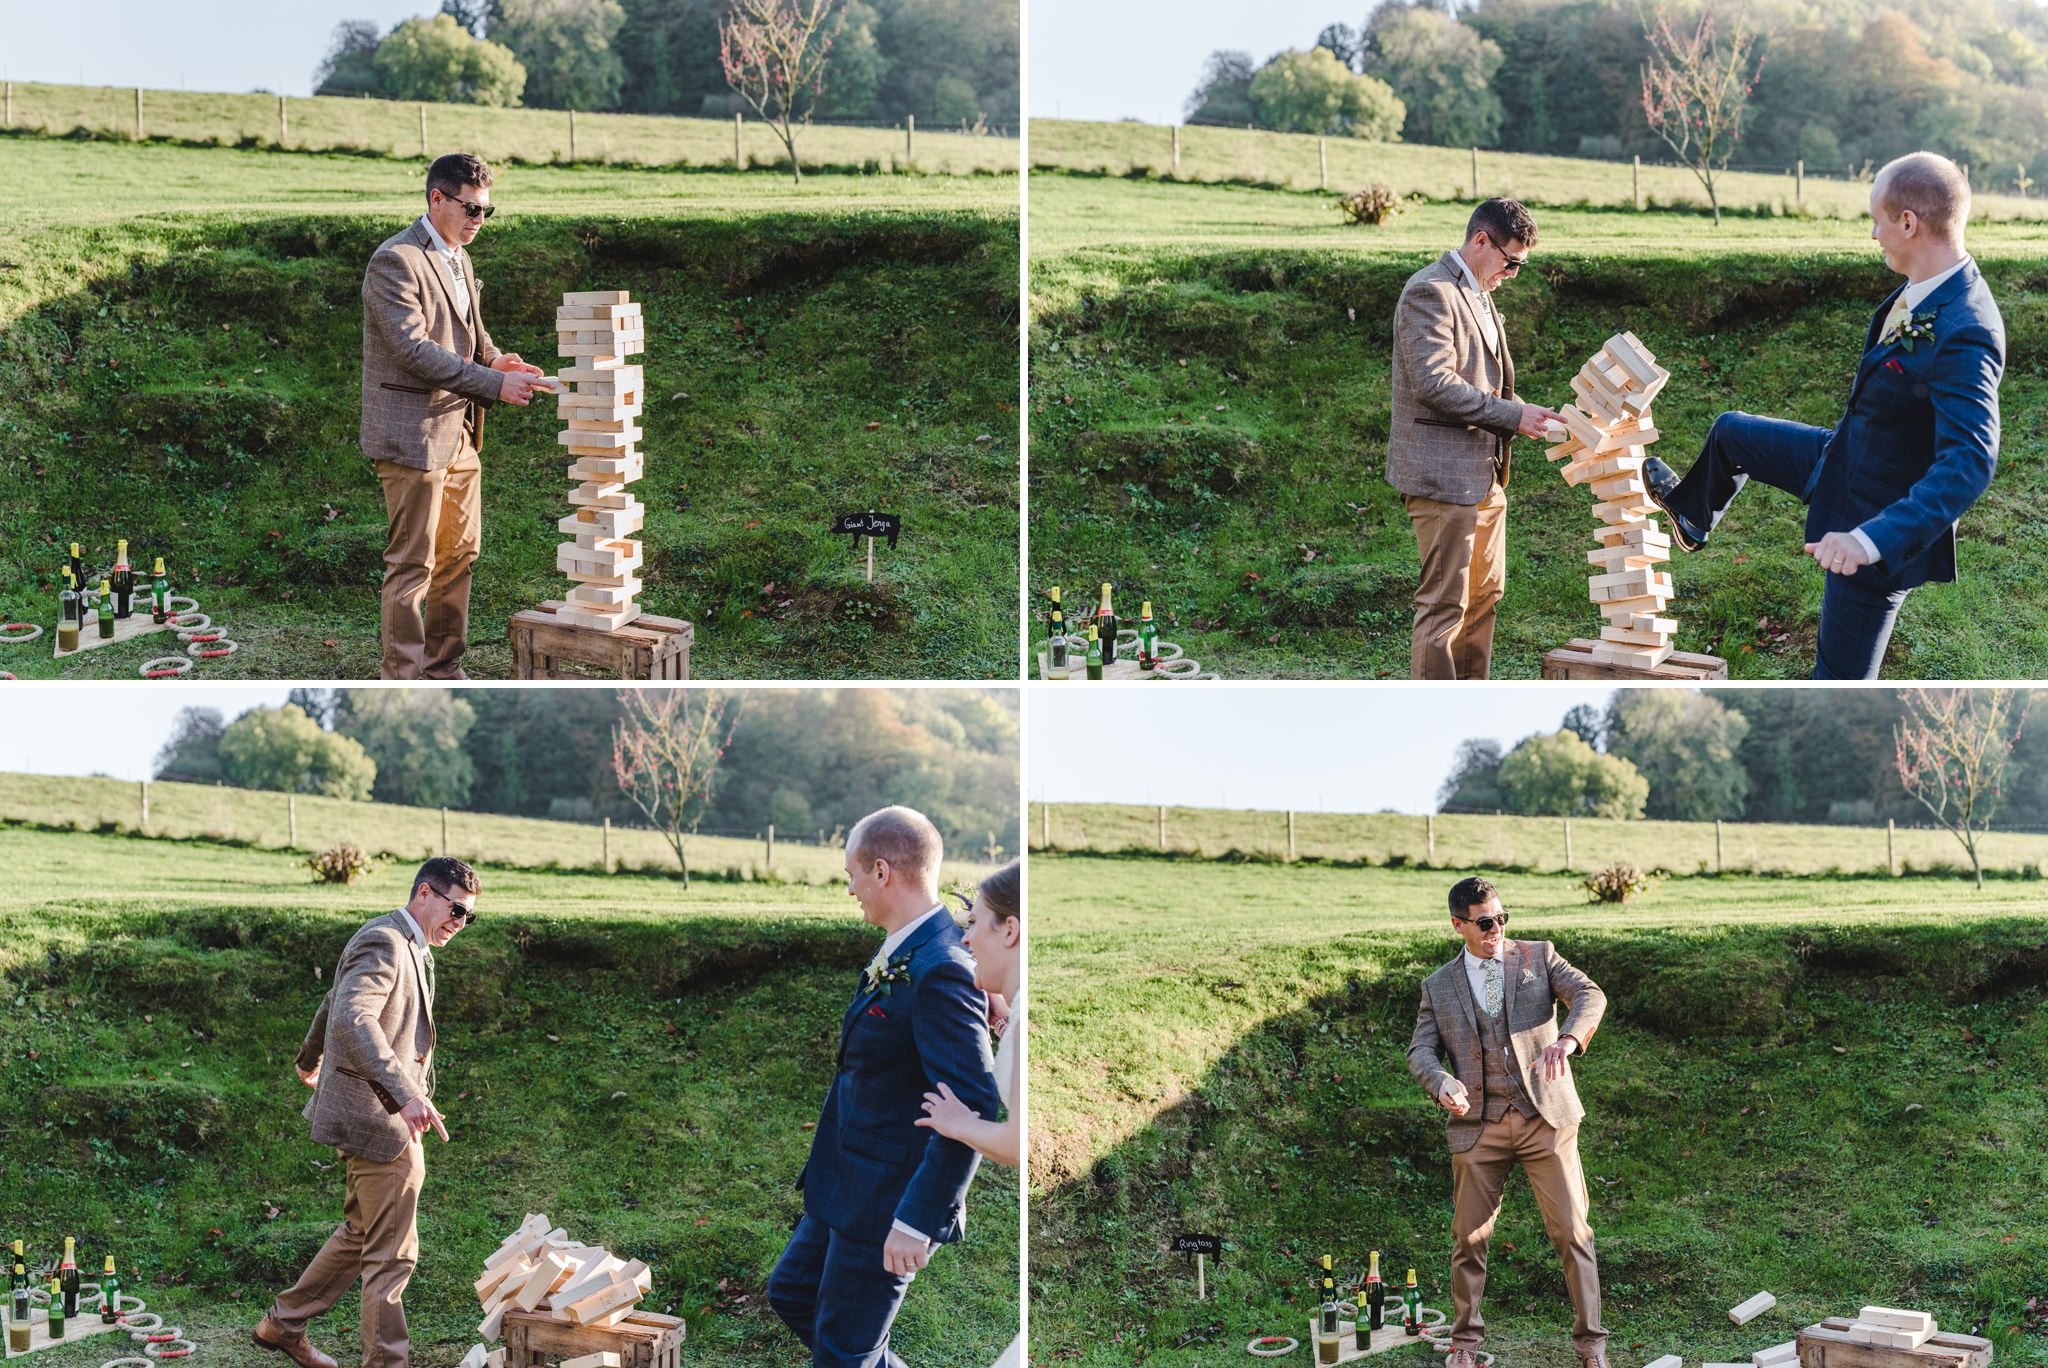 Jenga kicked over by the groom at a wedding